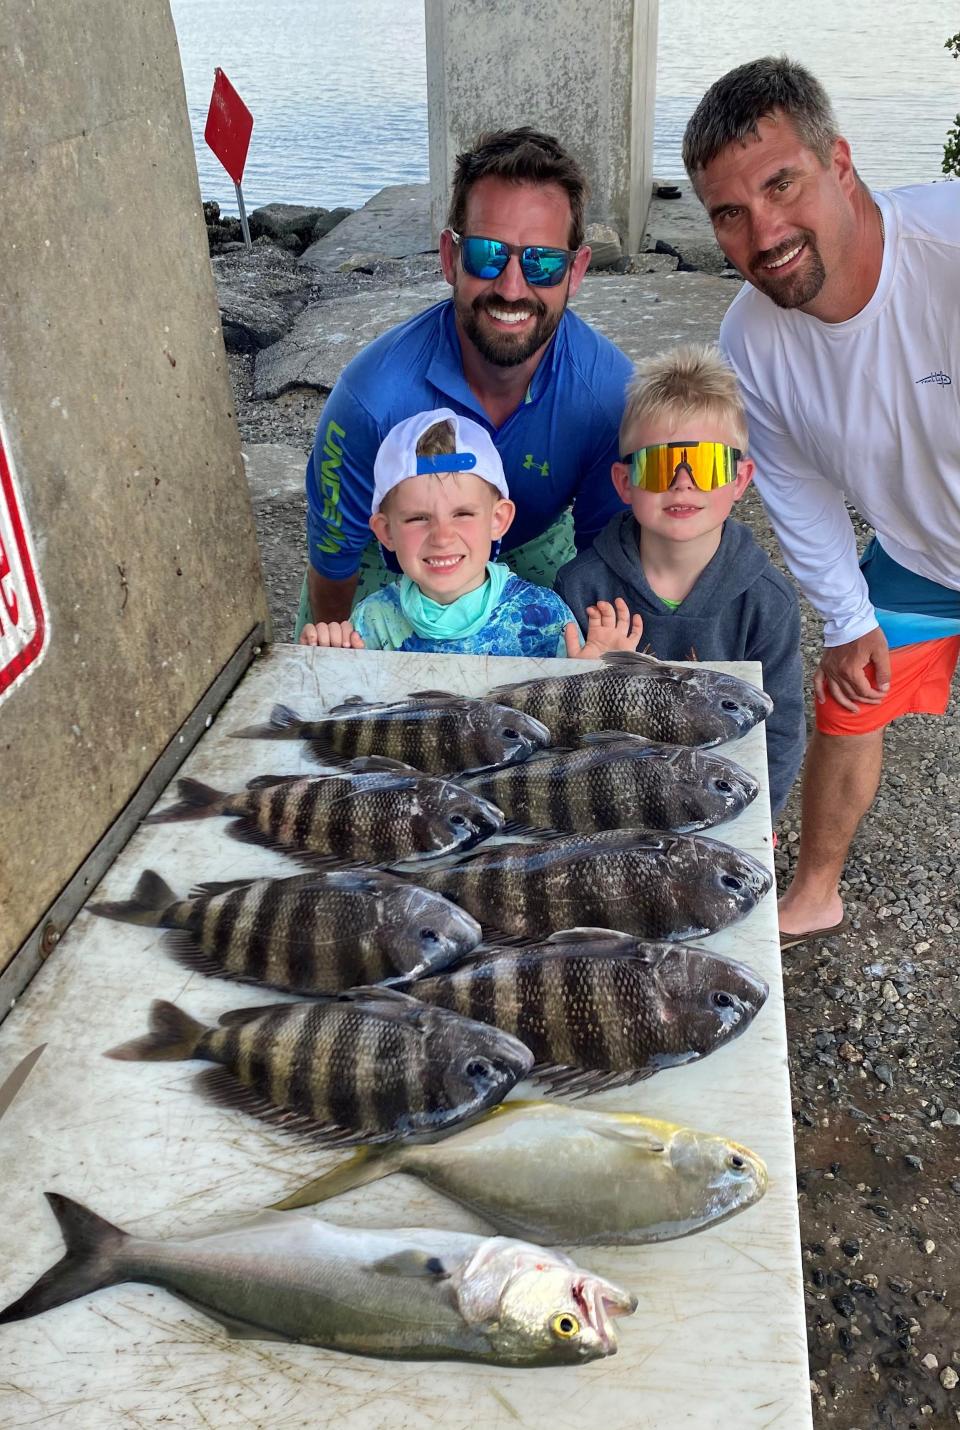 Tommy Clark, Mason Clark, Eli Clark, and Josh Hearn with a table full of quality fare after a day spent with Capt. Jeff Patterson aboard his Pole Dancer charter boat.